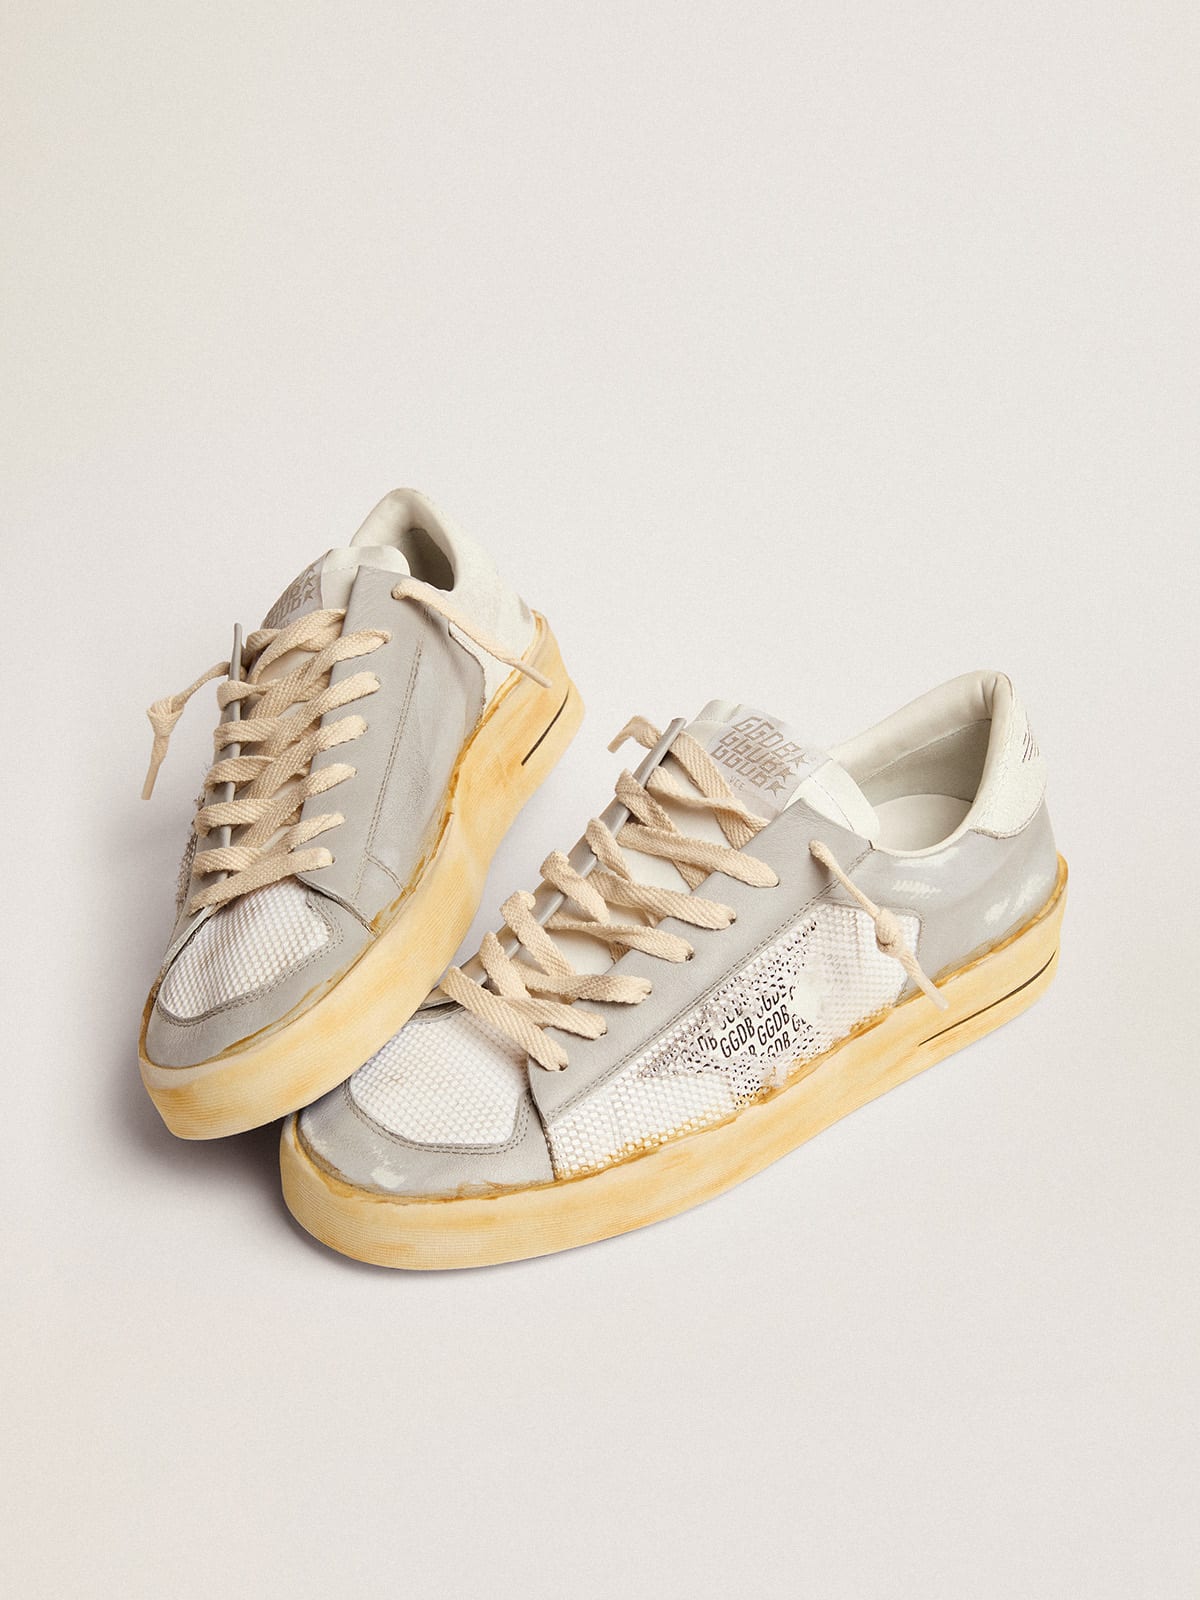 Golden Goose - Men's Stardan with white leather star with GGDB print in 